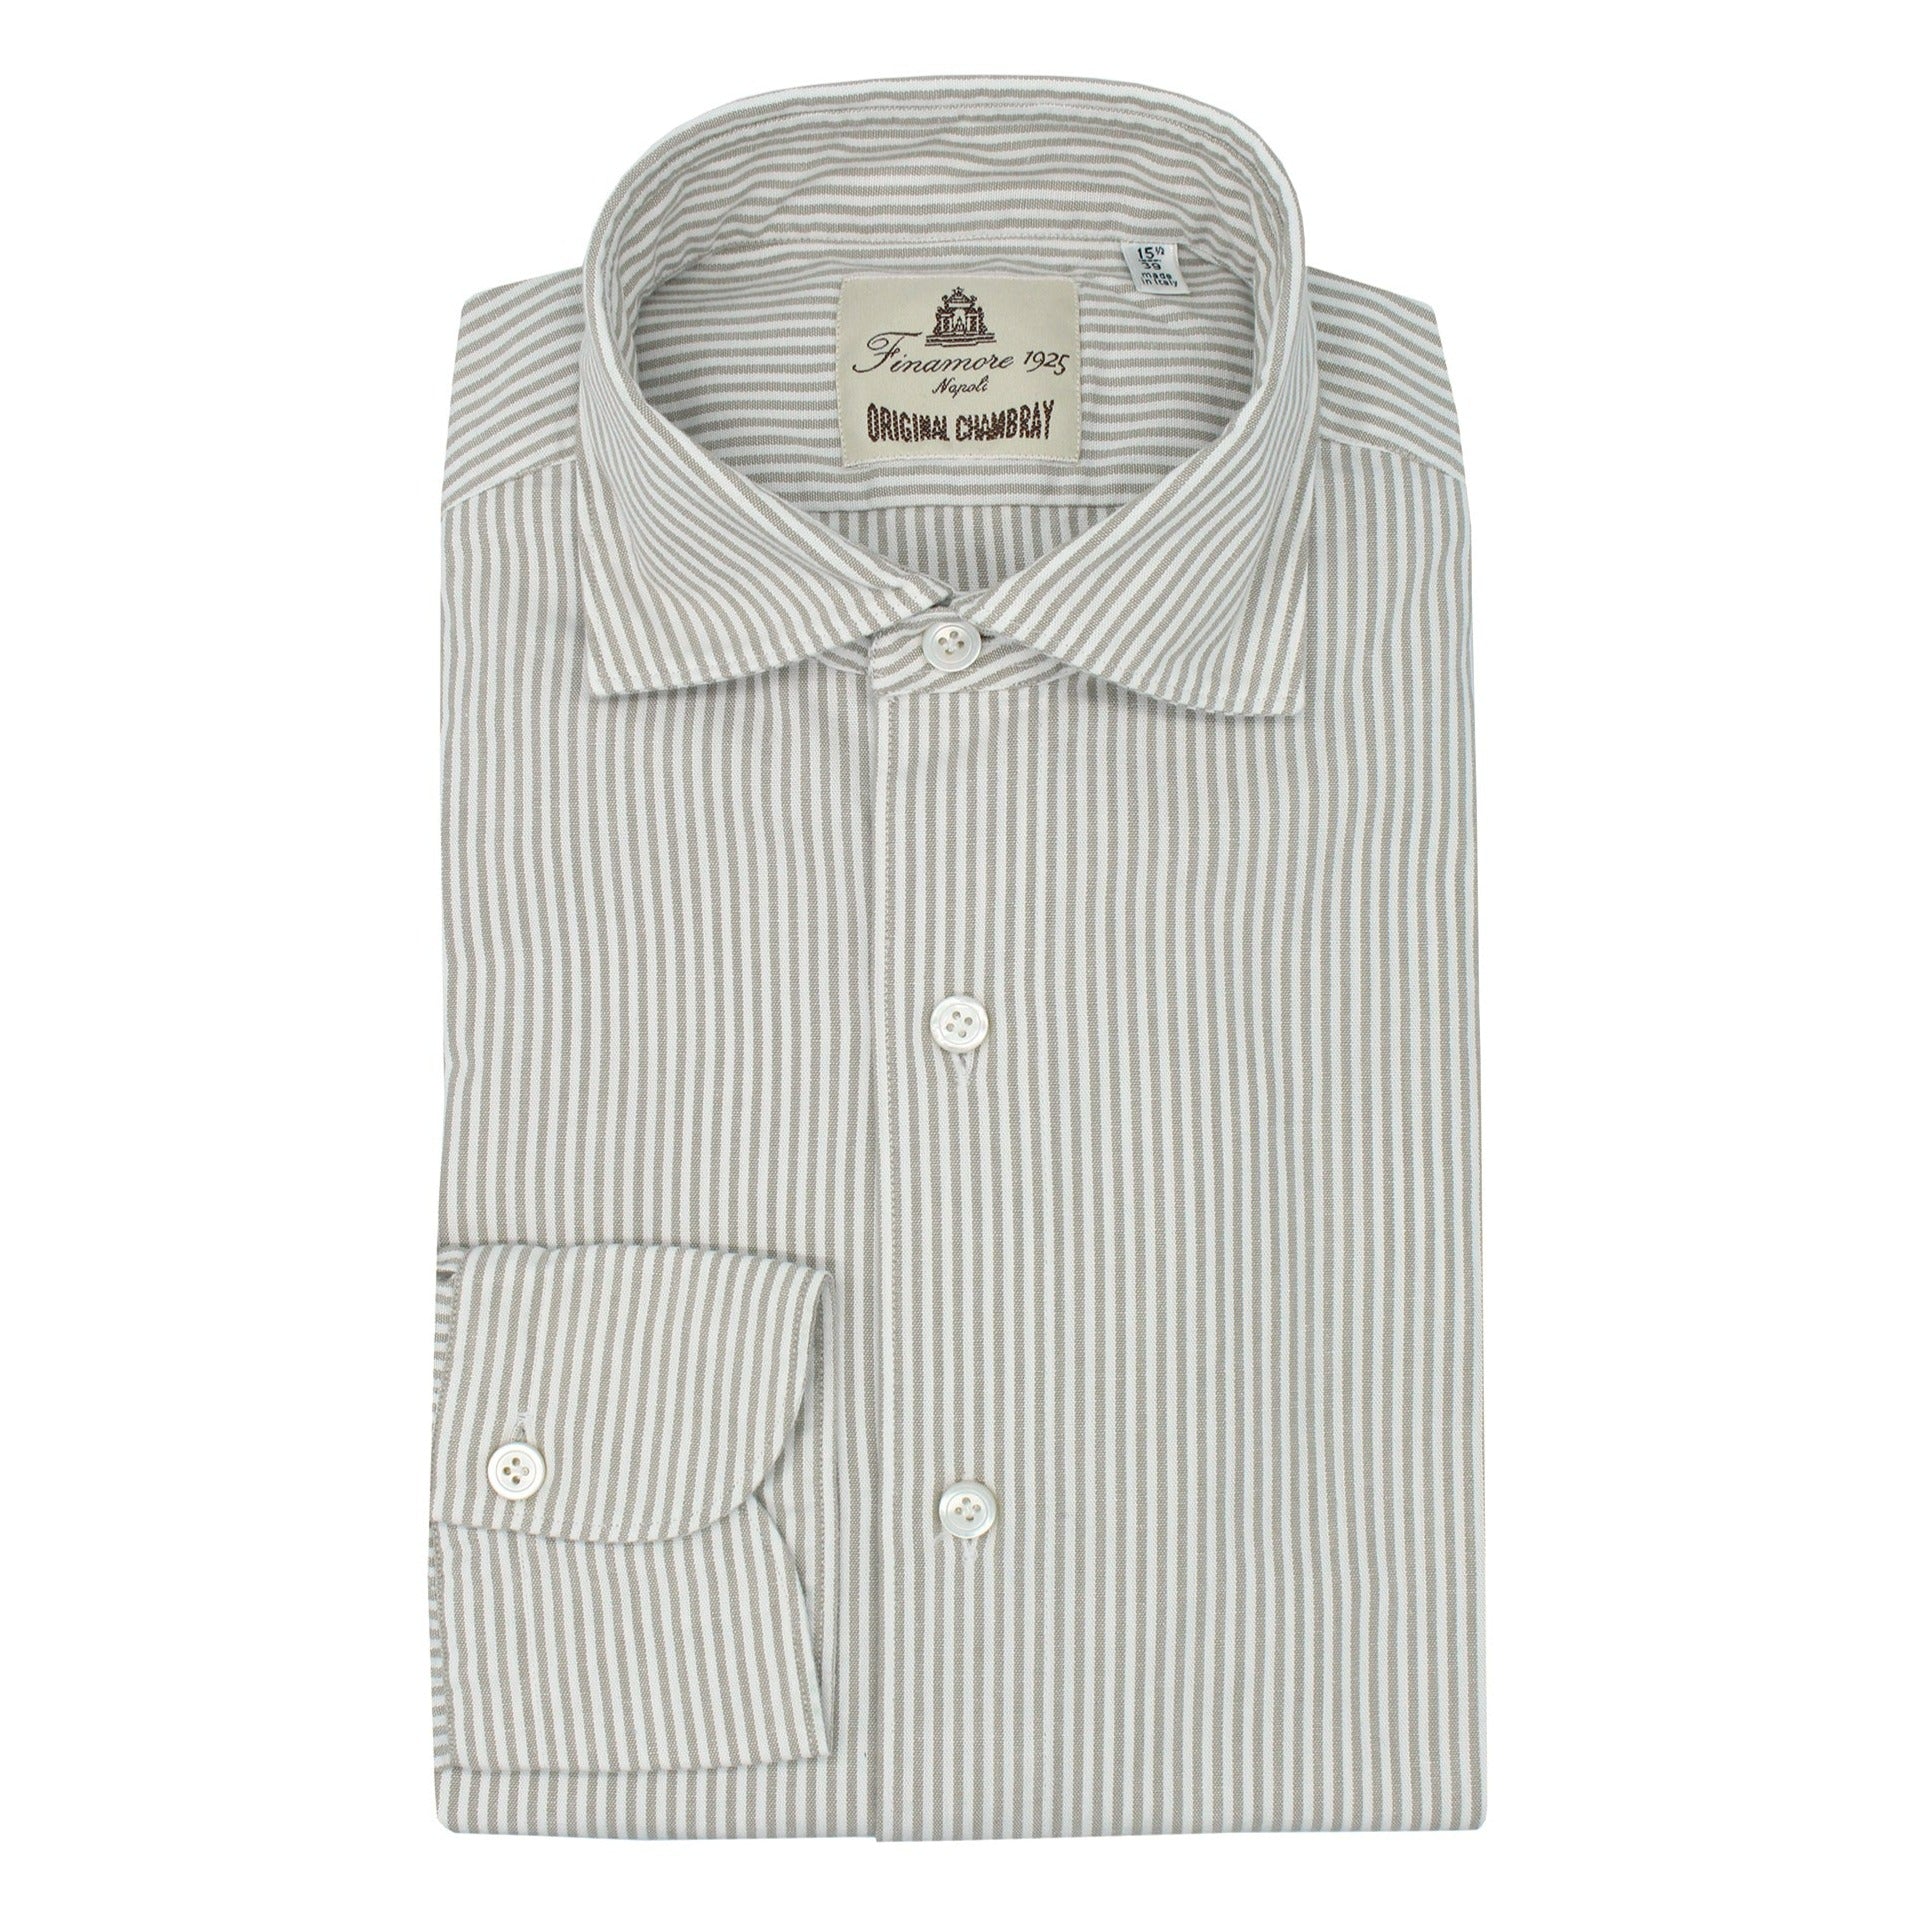 Sports shirt Tokyo in beige striped chambray